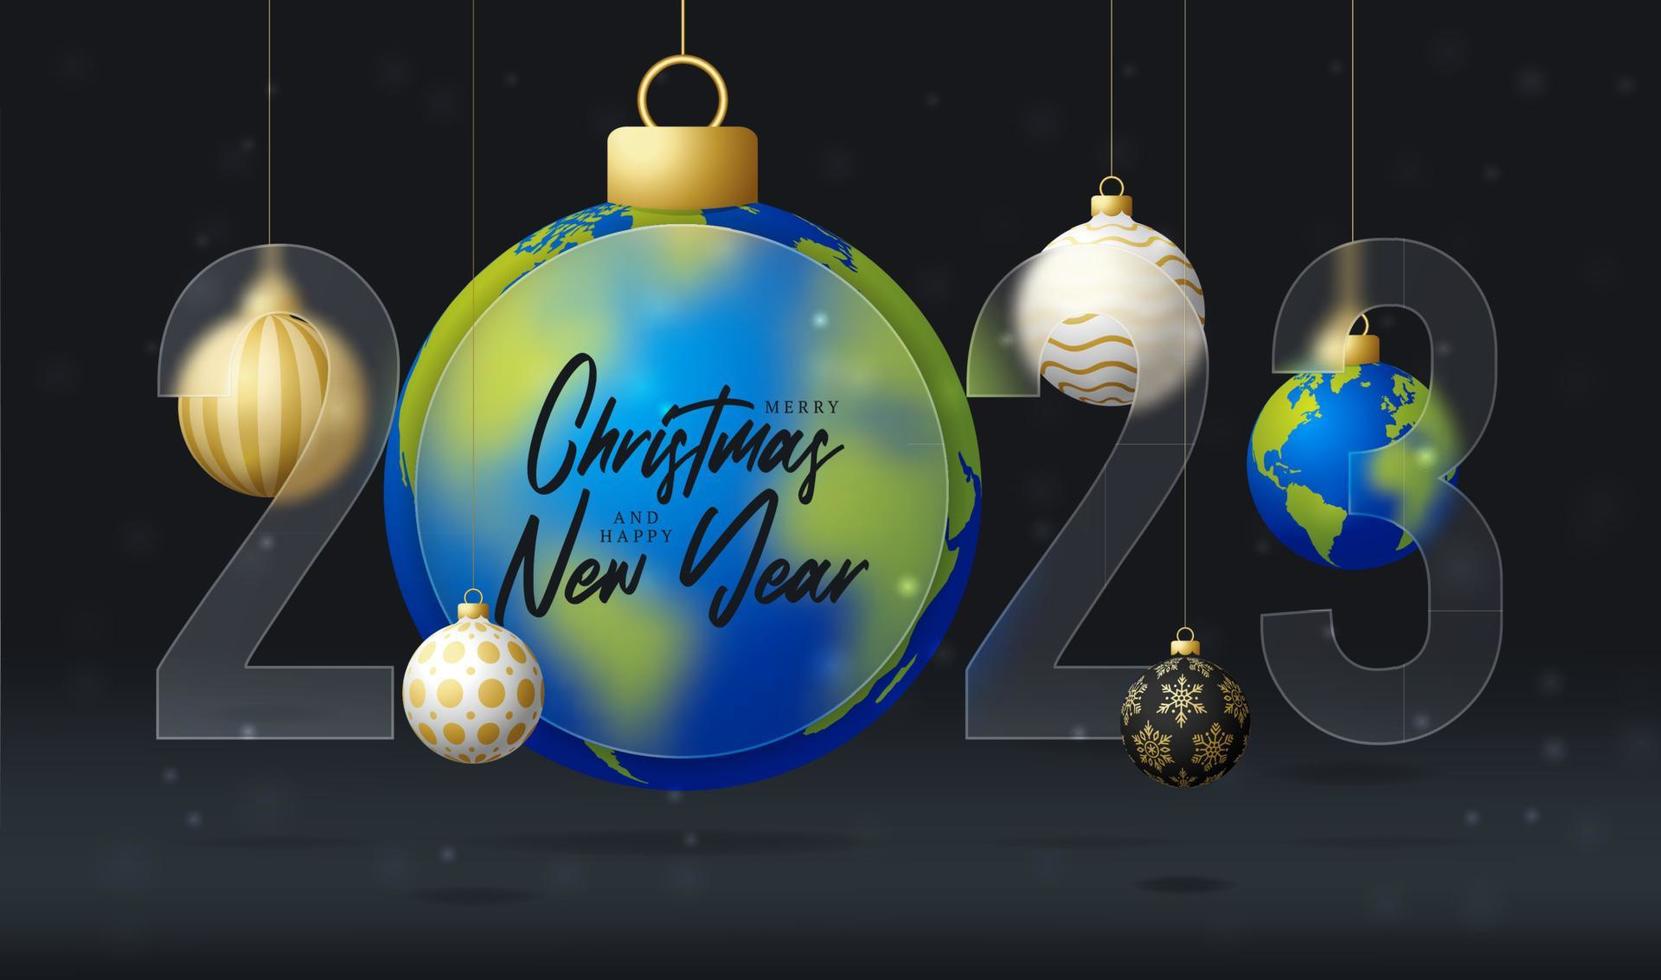 Planet earth 2023 sale banner or greeting card. Merry Christmas and happy new year 2023 sport banner with glassmorphism or glass-morphism blur effect. Realistic vector illustration